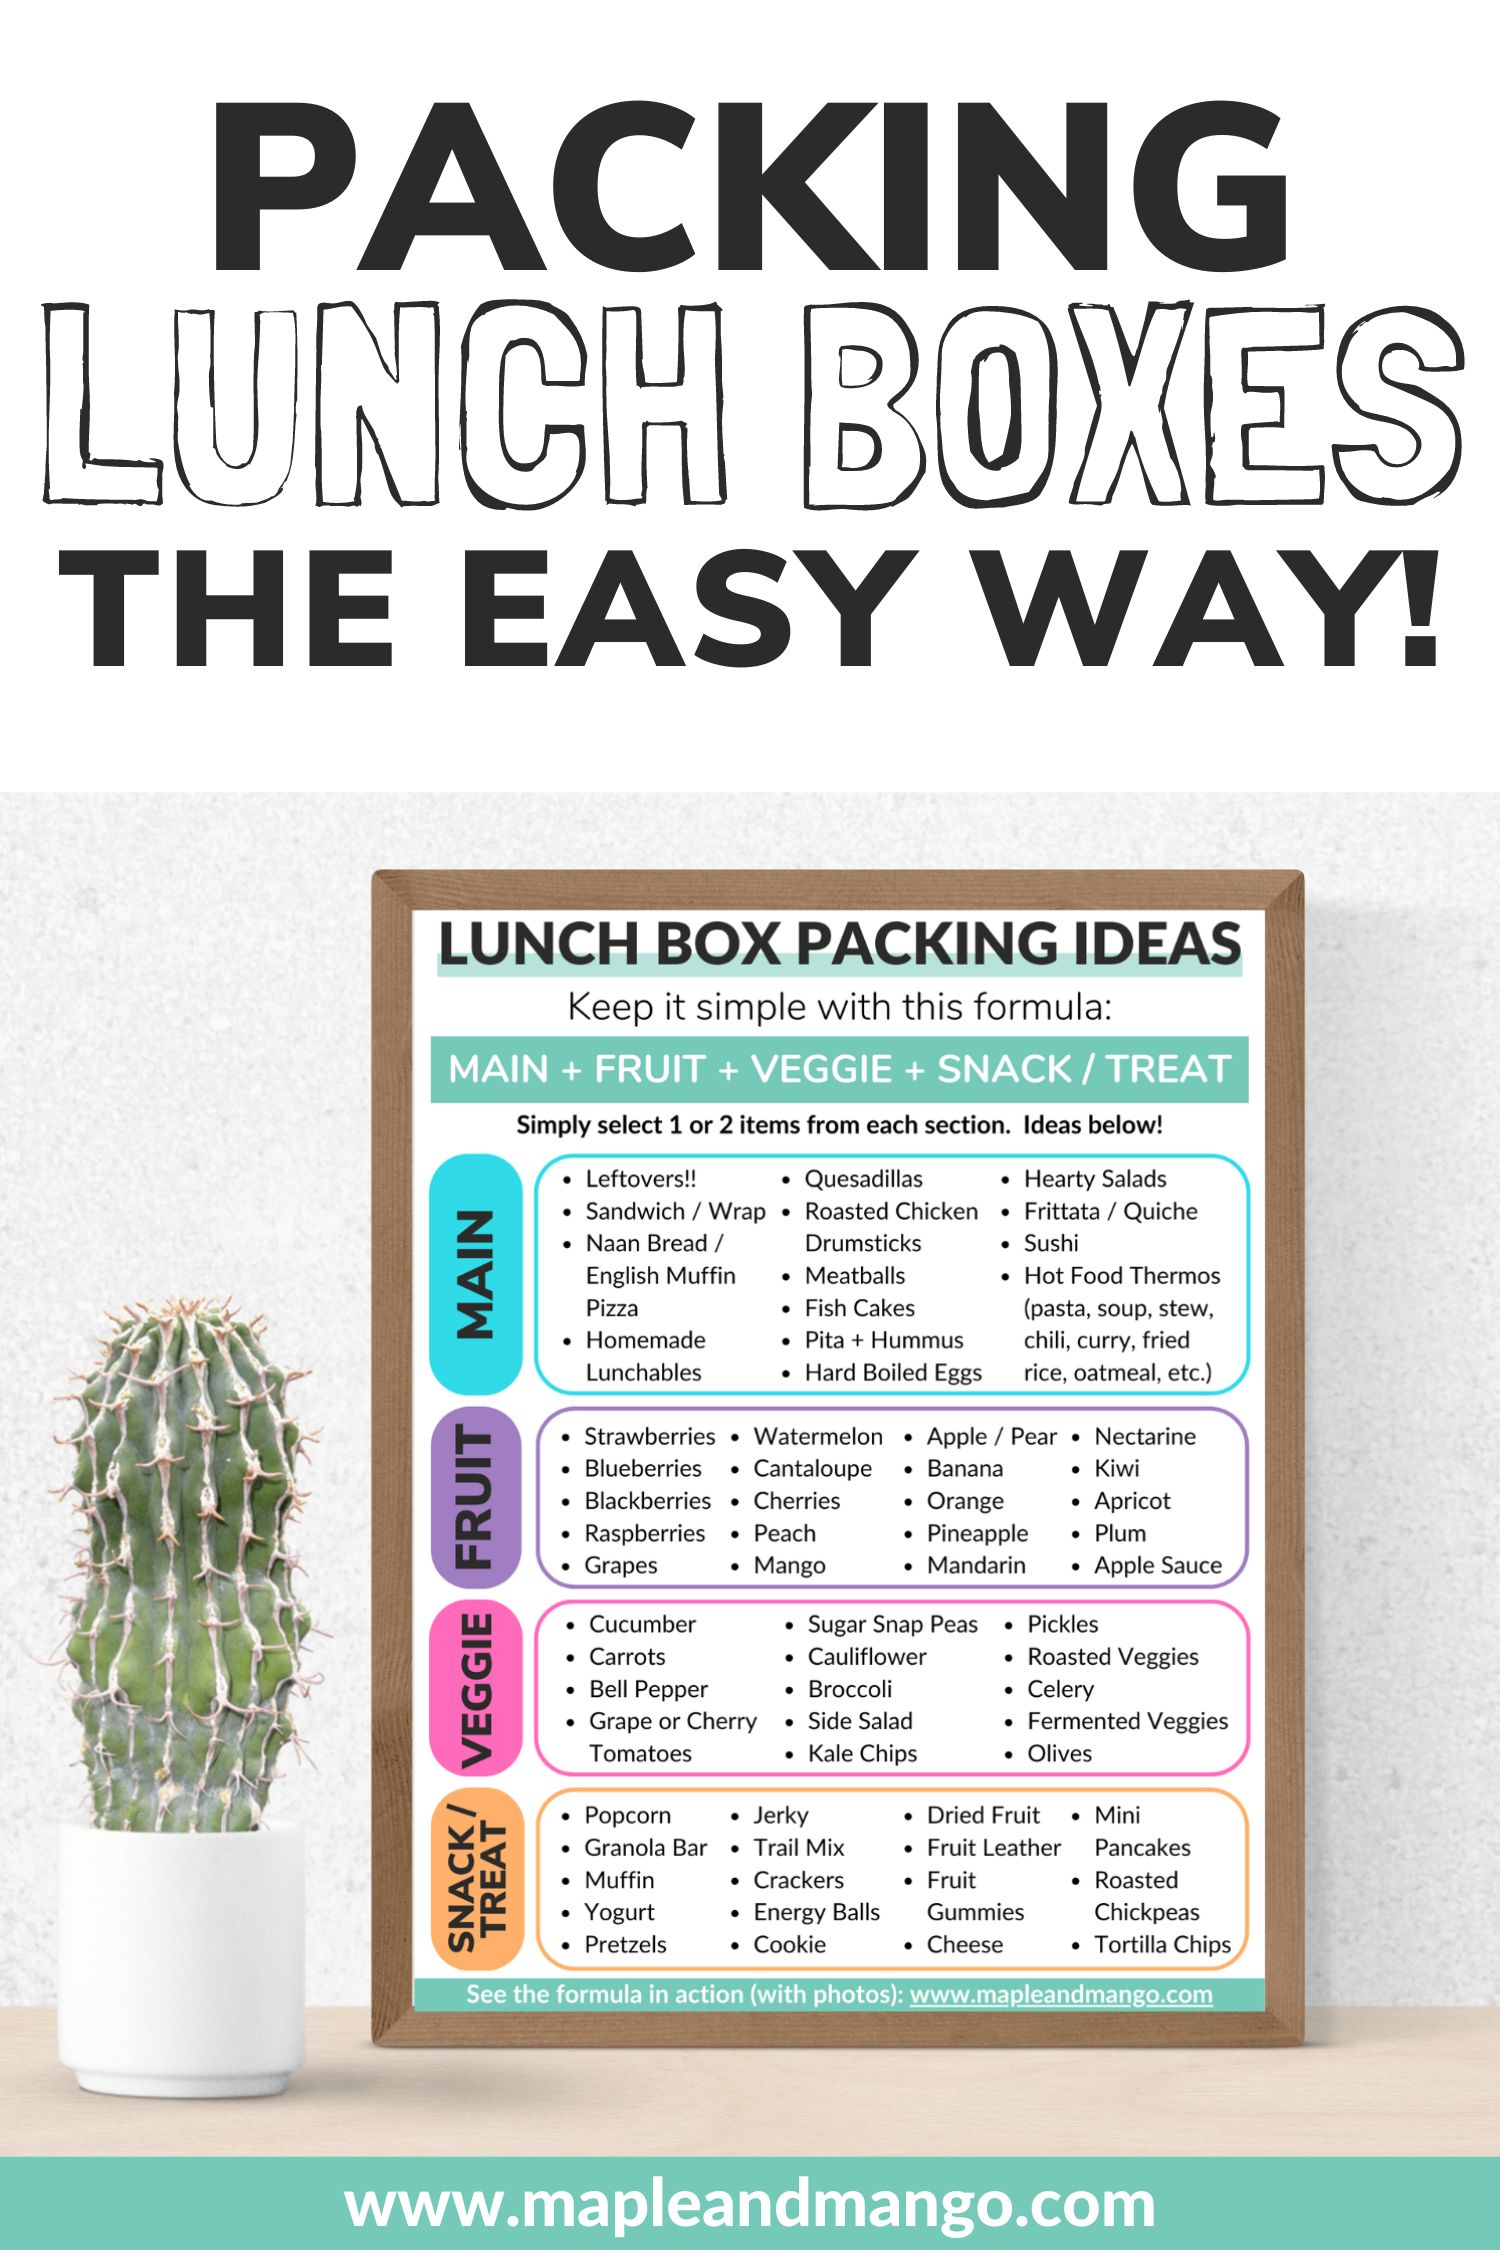 Lunch box packing ideas printable that is framed next to a cactus.